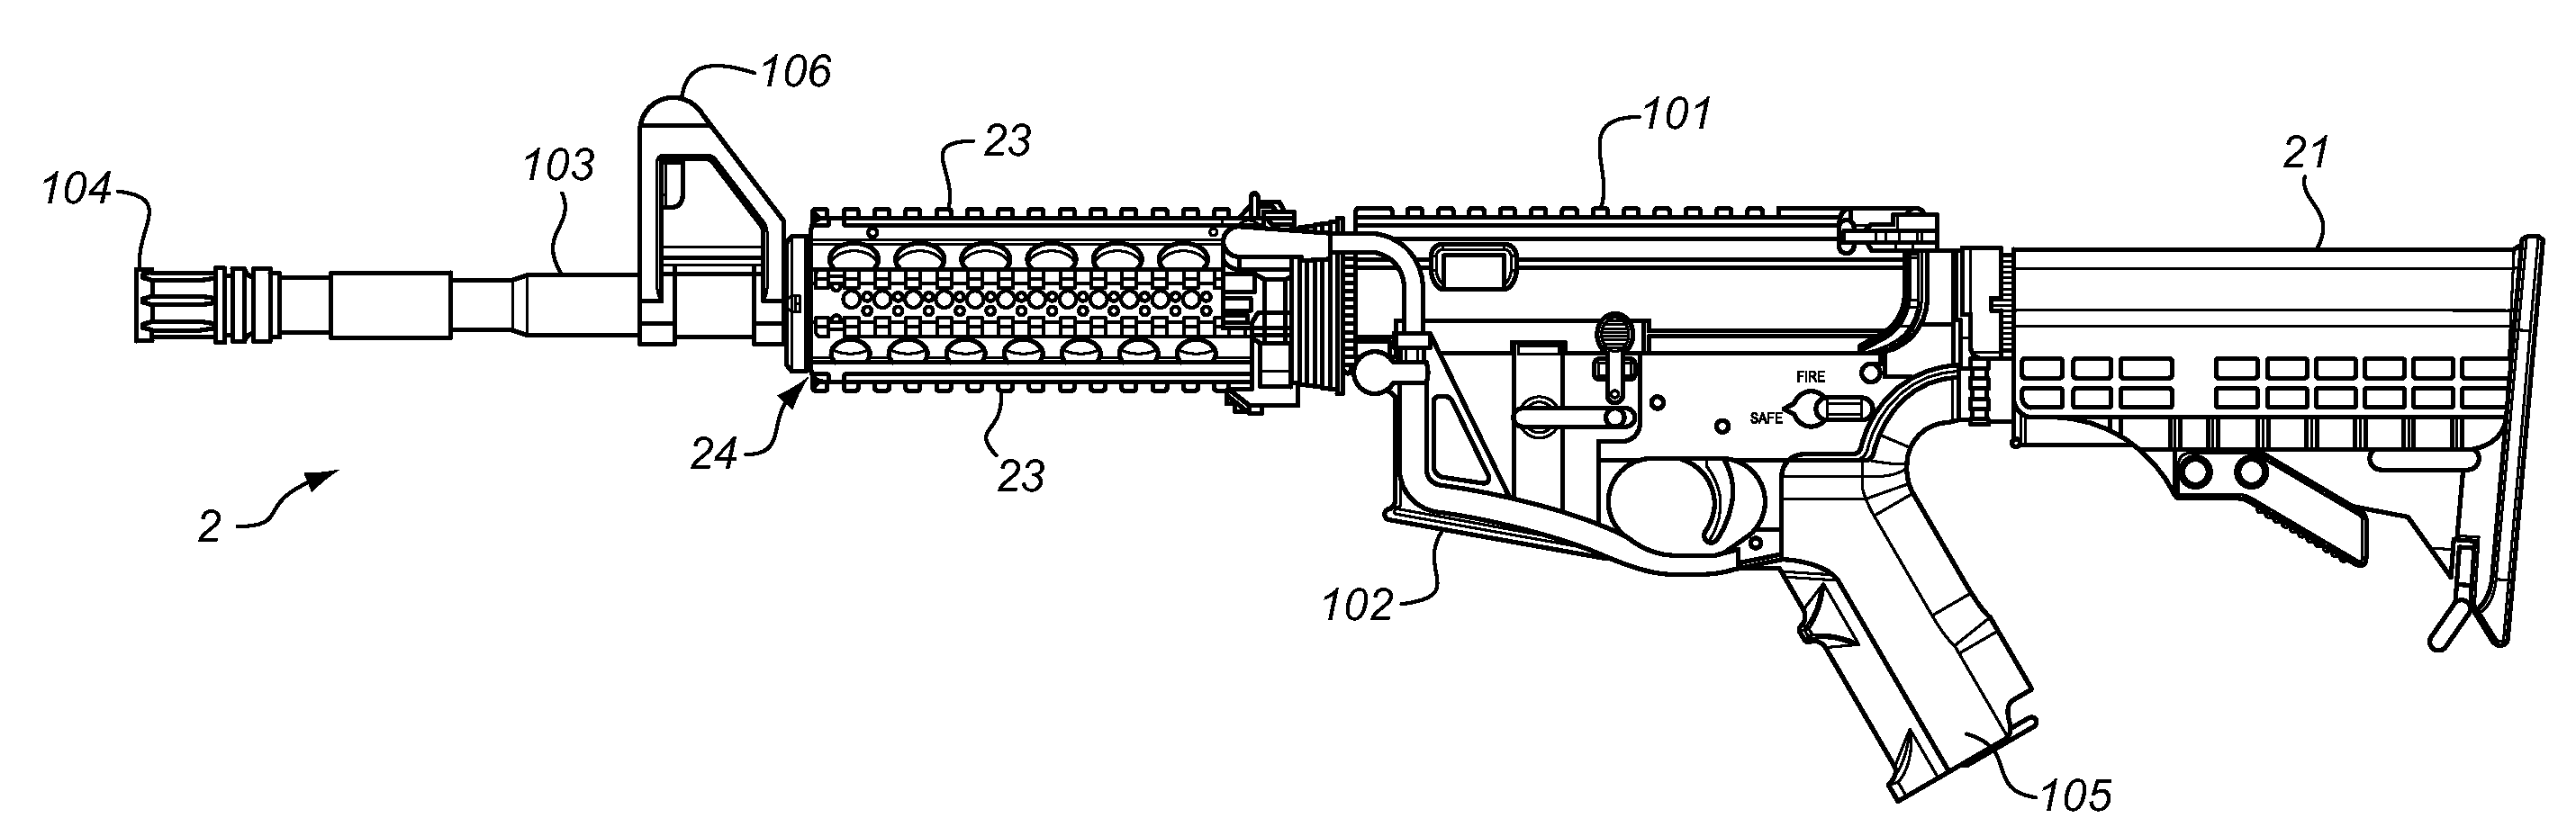 Communication and control of accessories mounted on the powered rail of a weapon